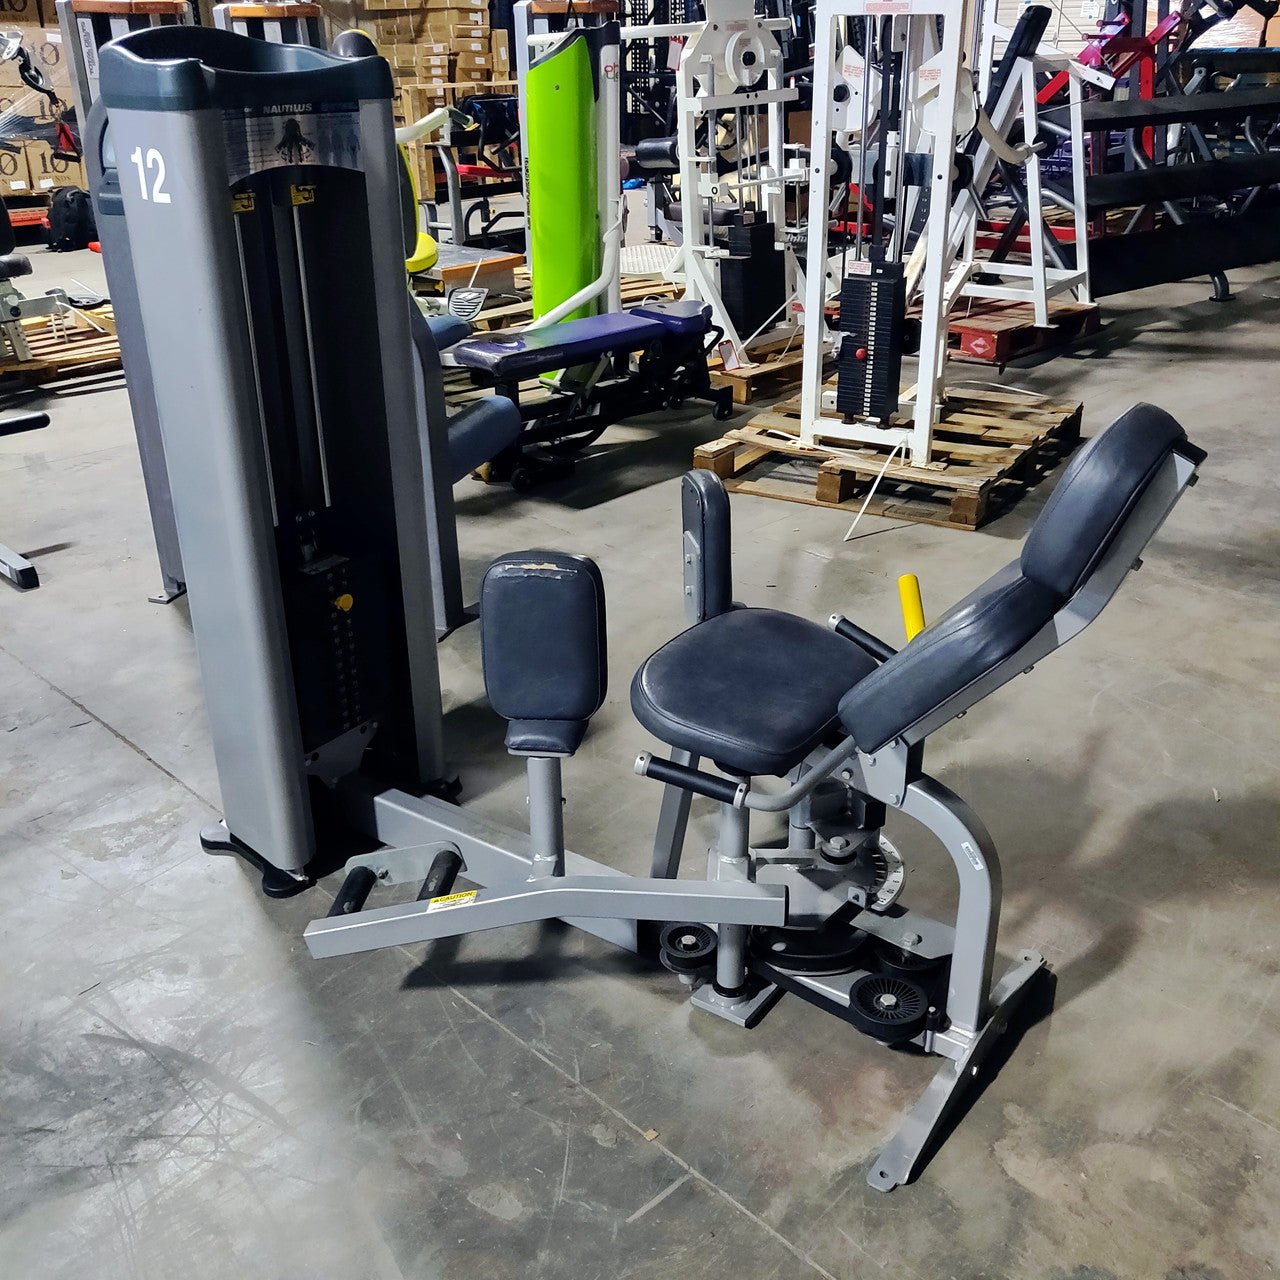 Nautilus Hip Abductor/Adductor Combo Steel Series